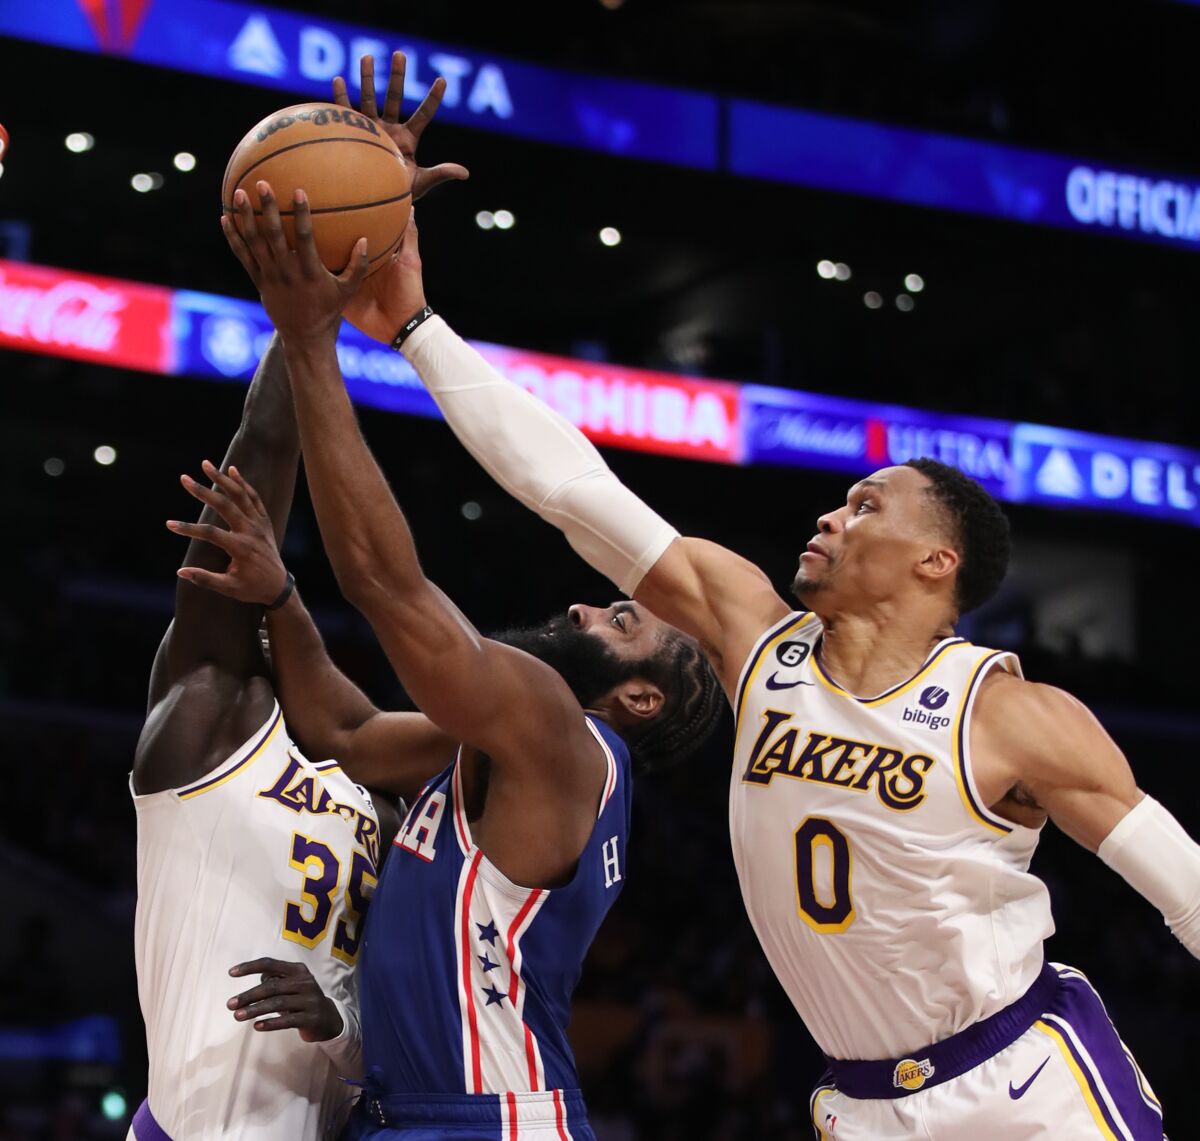 Lakers point guard Russell Westbrook tries to block a shot by 76ers guard James Harden.